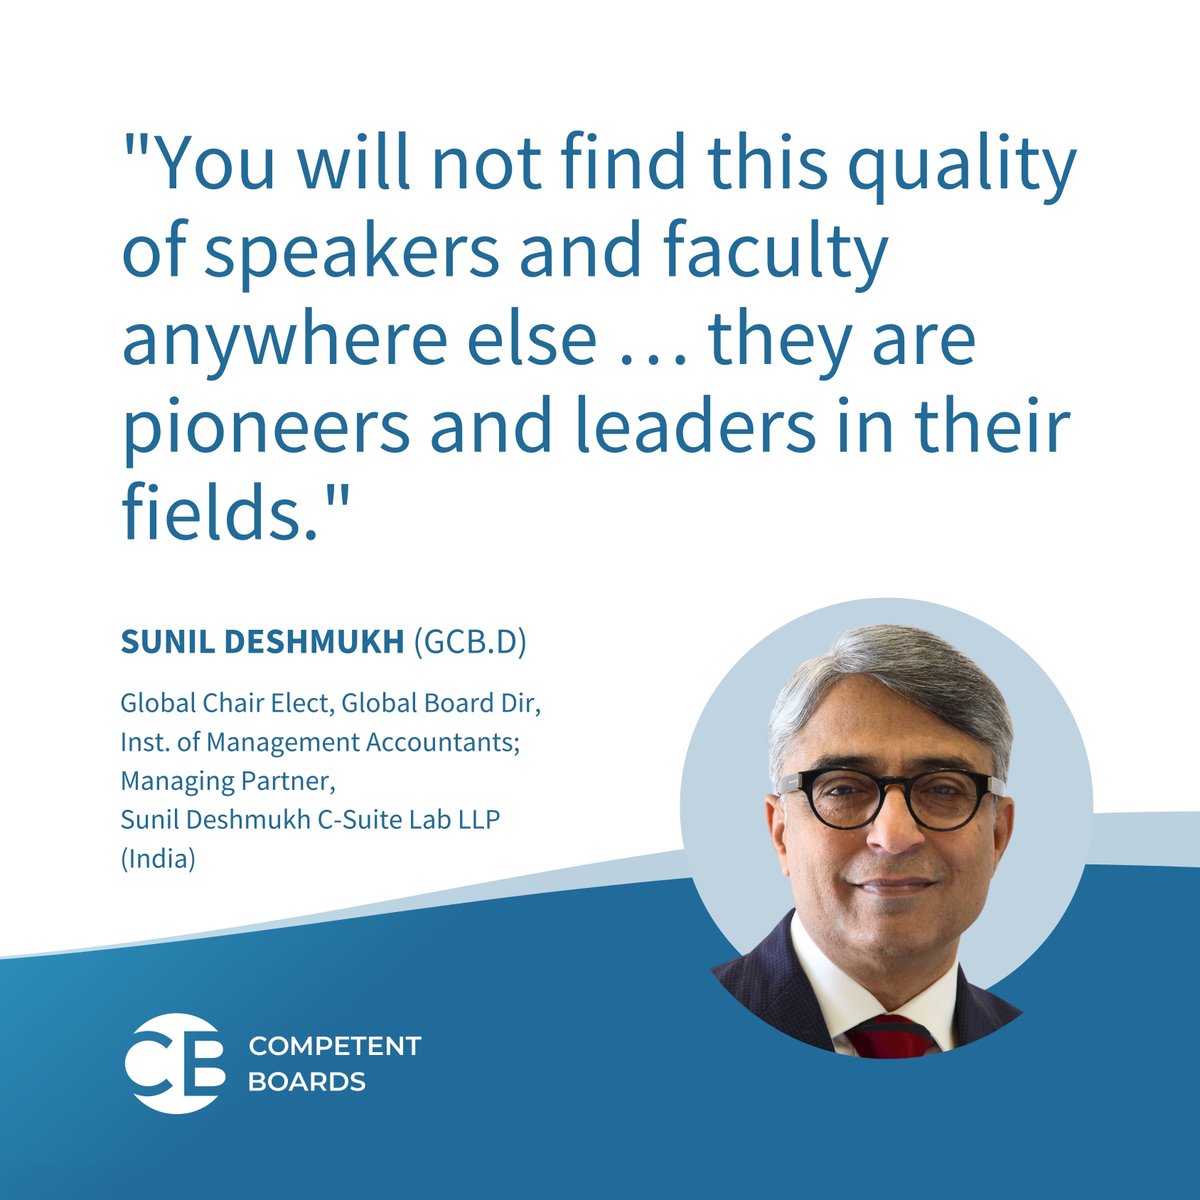 Thank you Competent Boards alumnus Sunil Deshmukh for your kind words! Want the same experience? Learn more about our #Sustainability & #ESG Designation and Certification competentboards.com/programs/susta… #ExecutiveEducation #BoardEducation